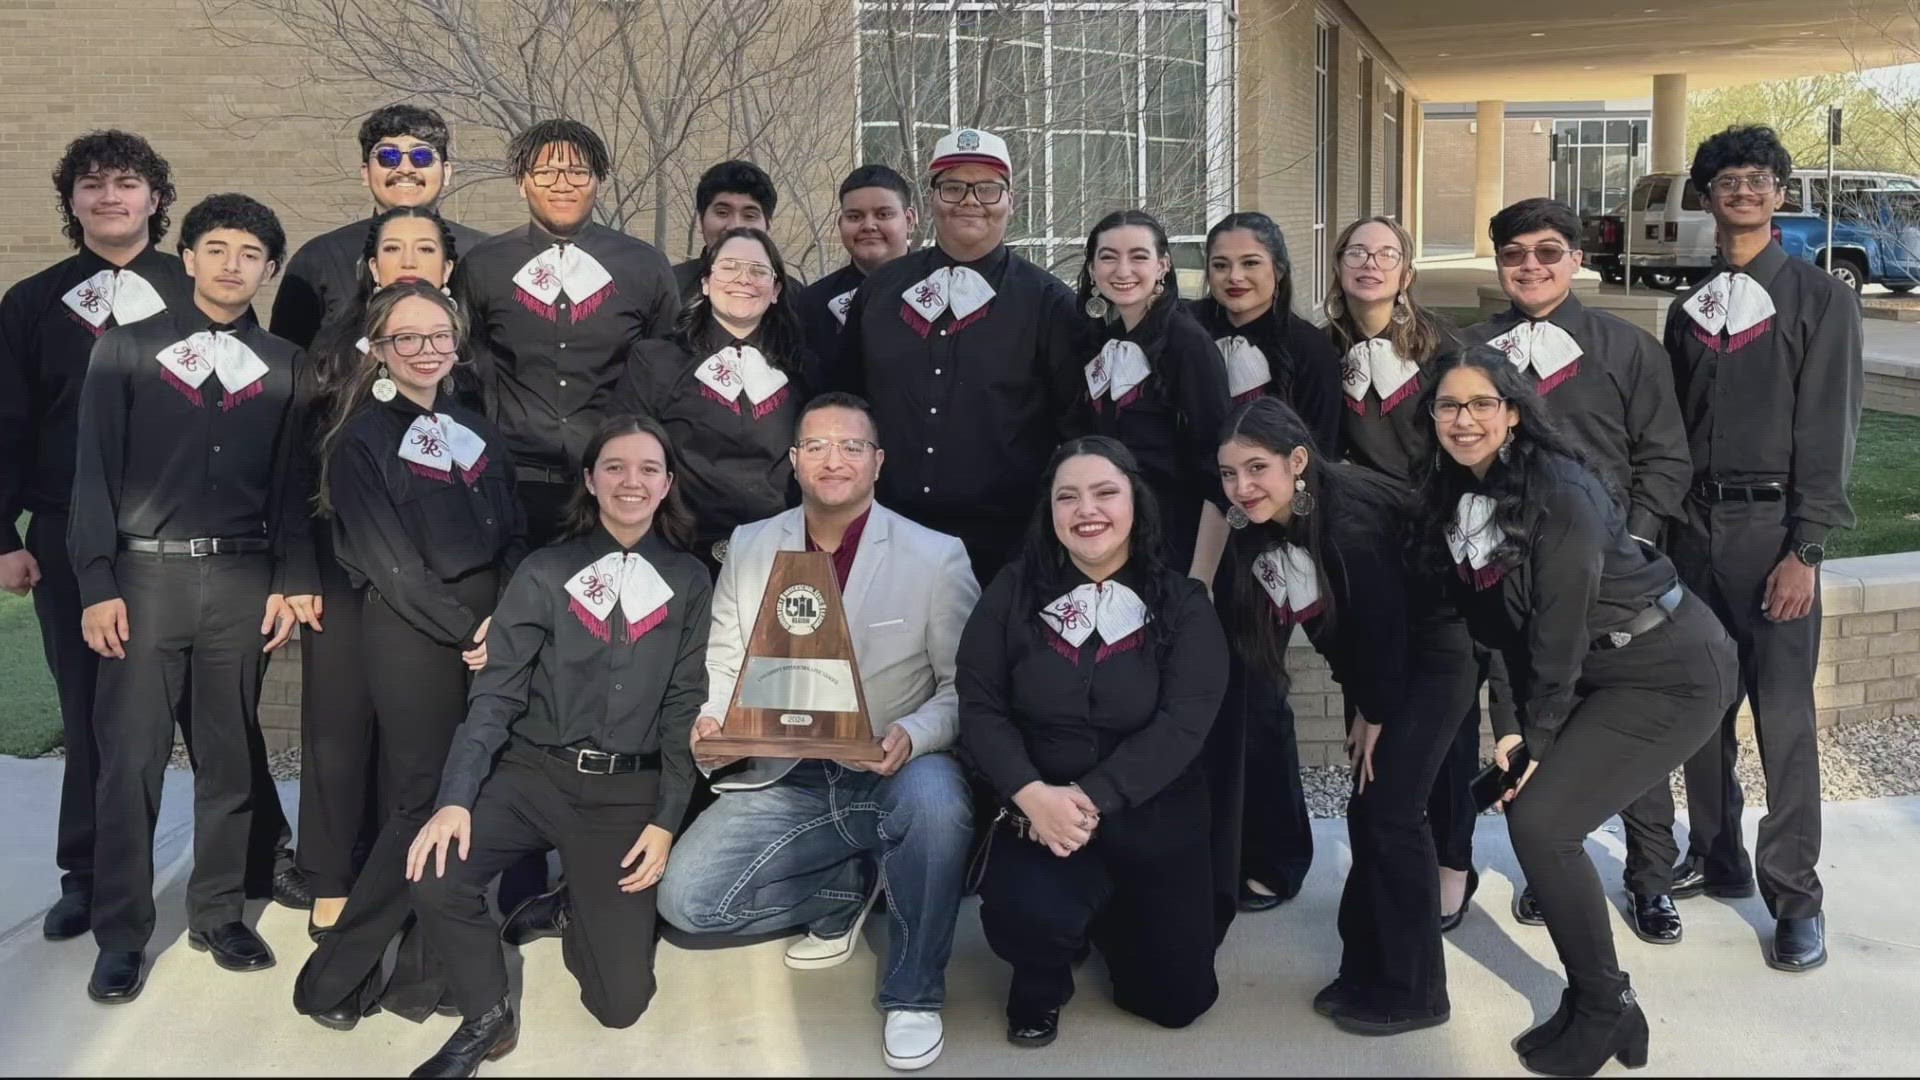 "Mariachi Revolución", the group's name, earned the best possible score of "1" from every judge at the UIL Mariachi Festival in El Paso this weekend.